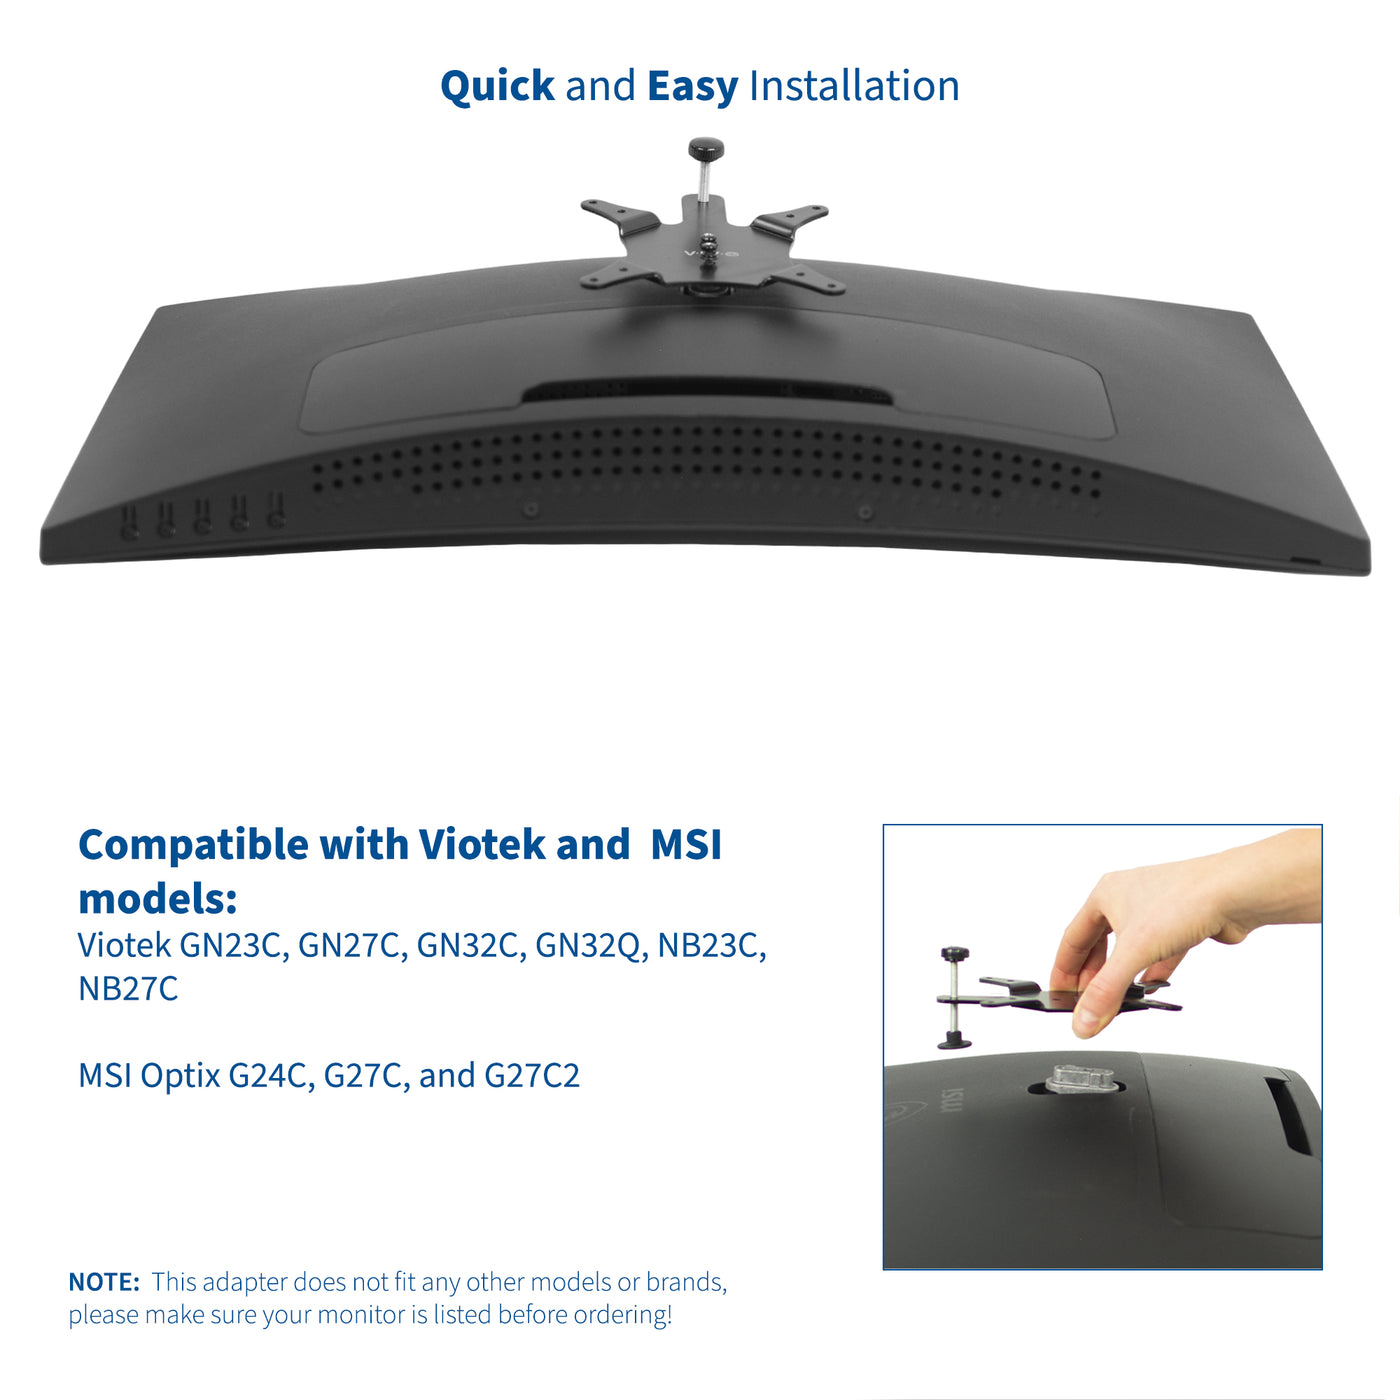 Installation and mounting are made easy for Viotek and MSI models. 